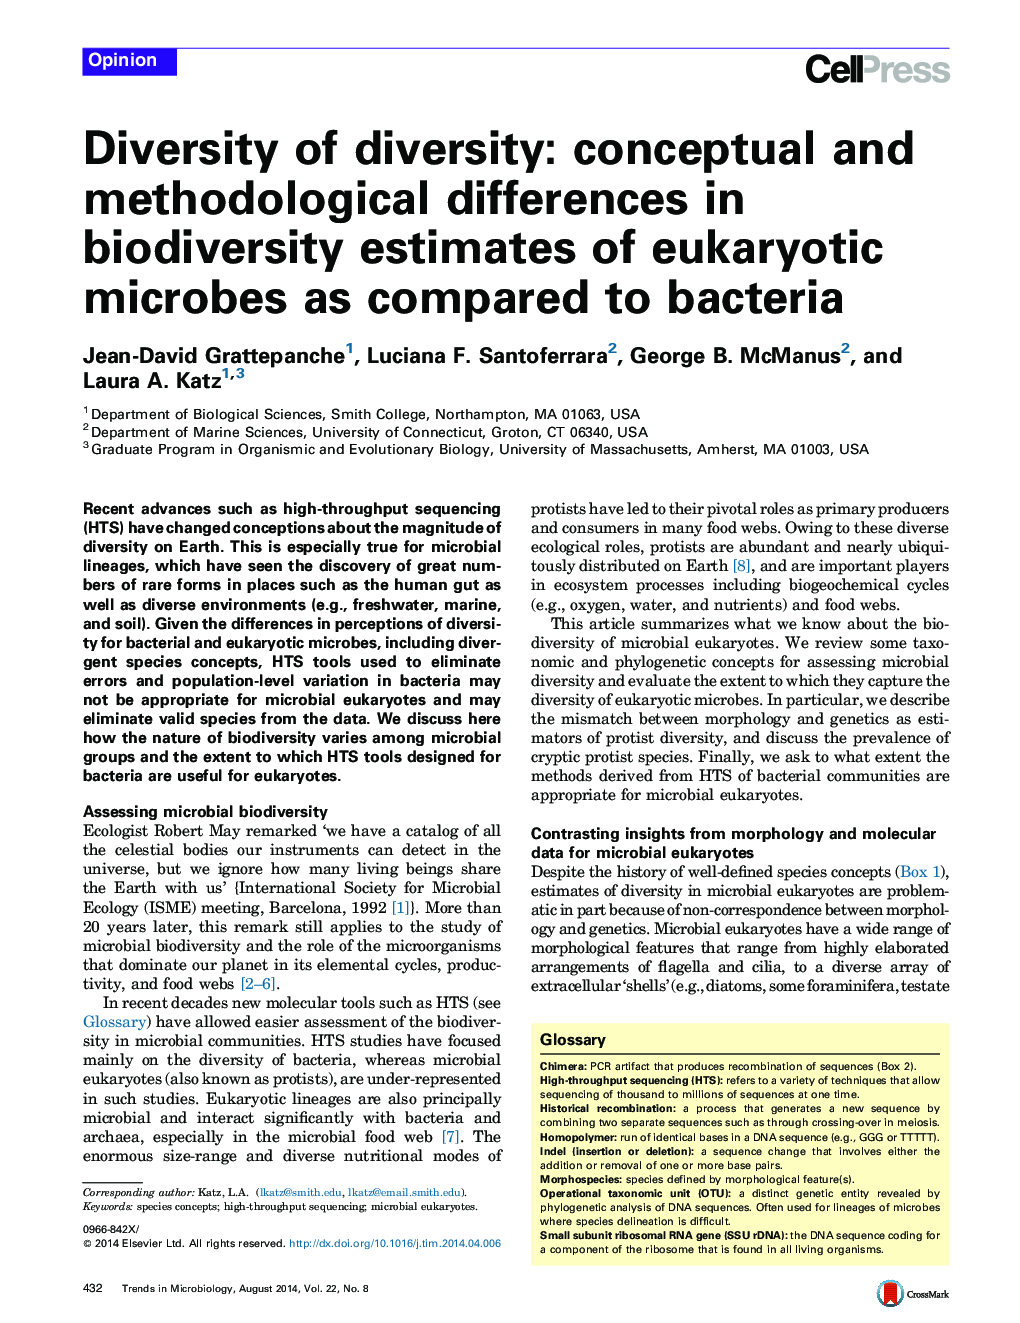 Diversity of diversity: conceptual and methodological differences in biodiversity estimates of eukaryotic microbes as compared to bacteria